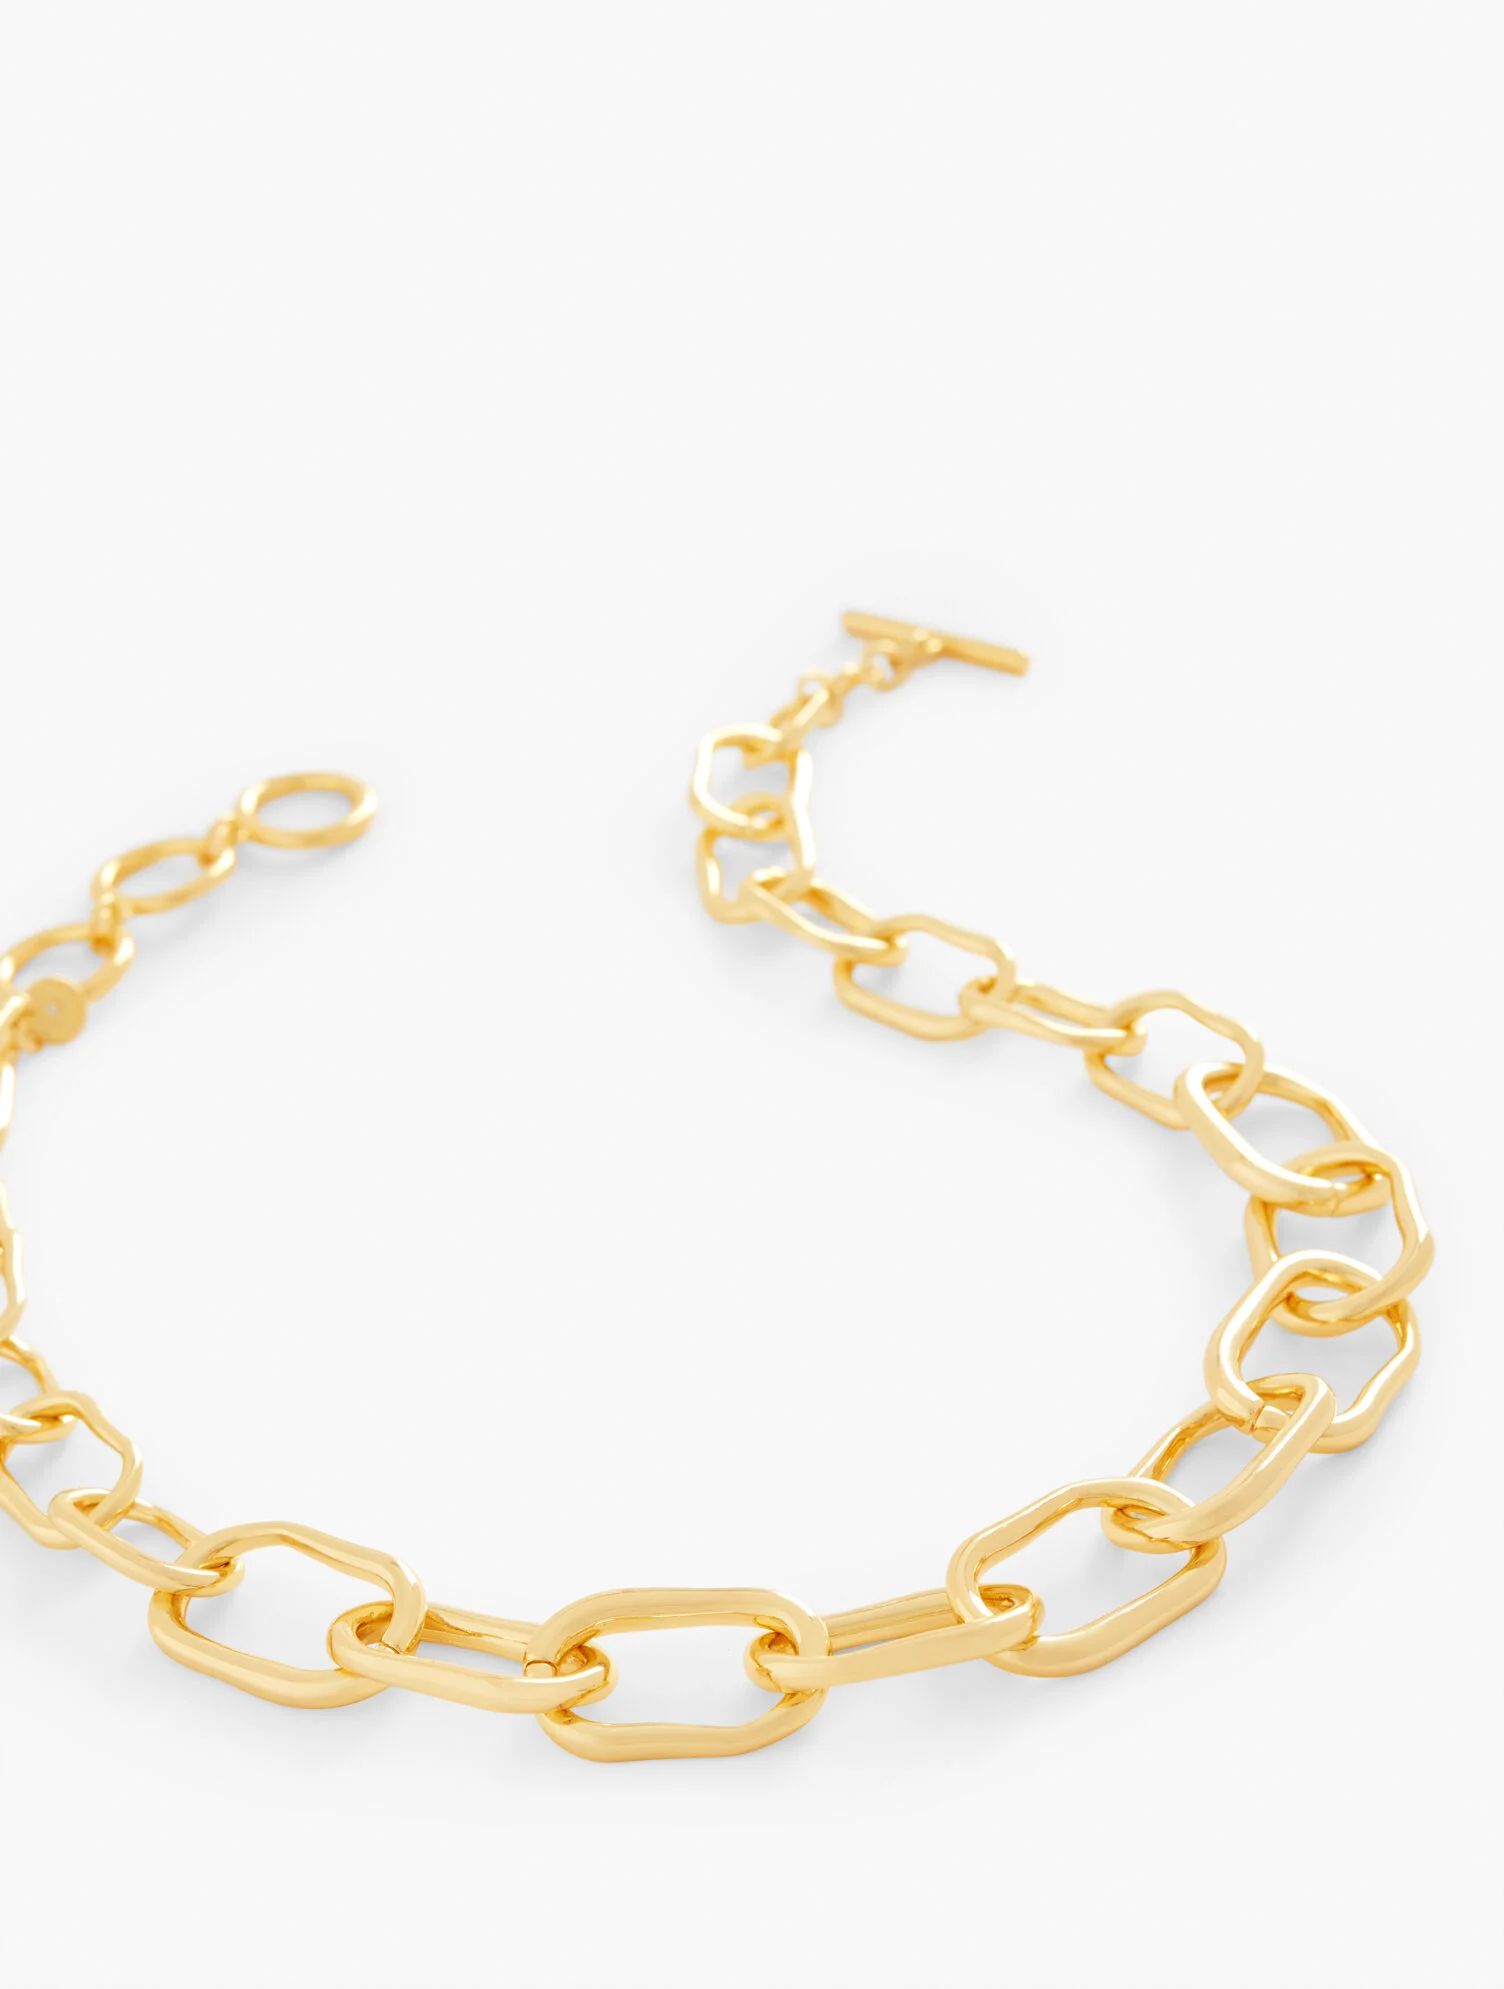 Smooth Links Necklace | Talbots